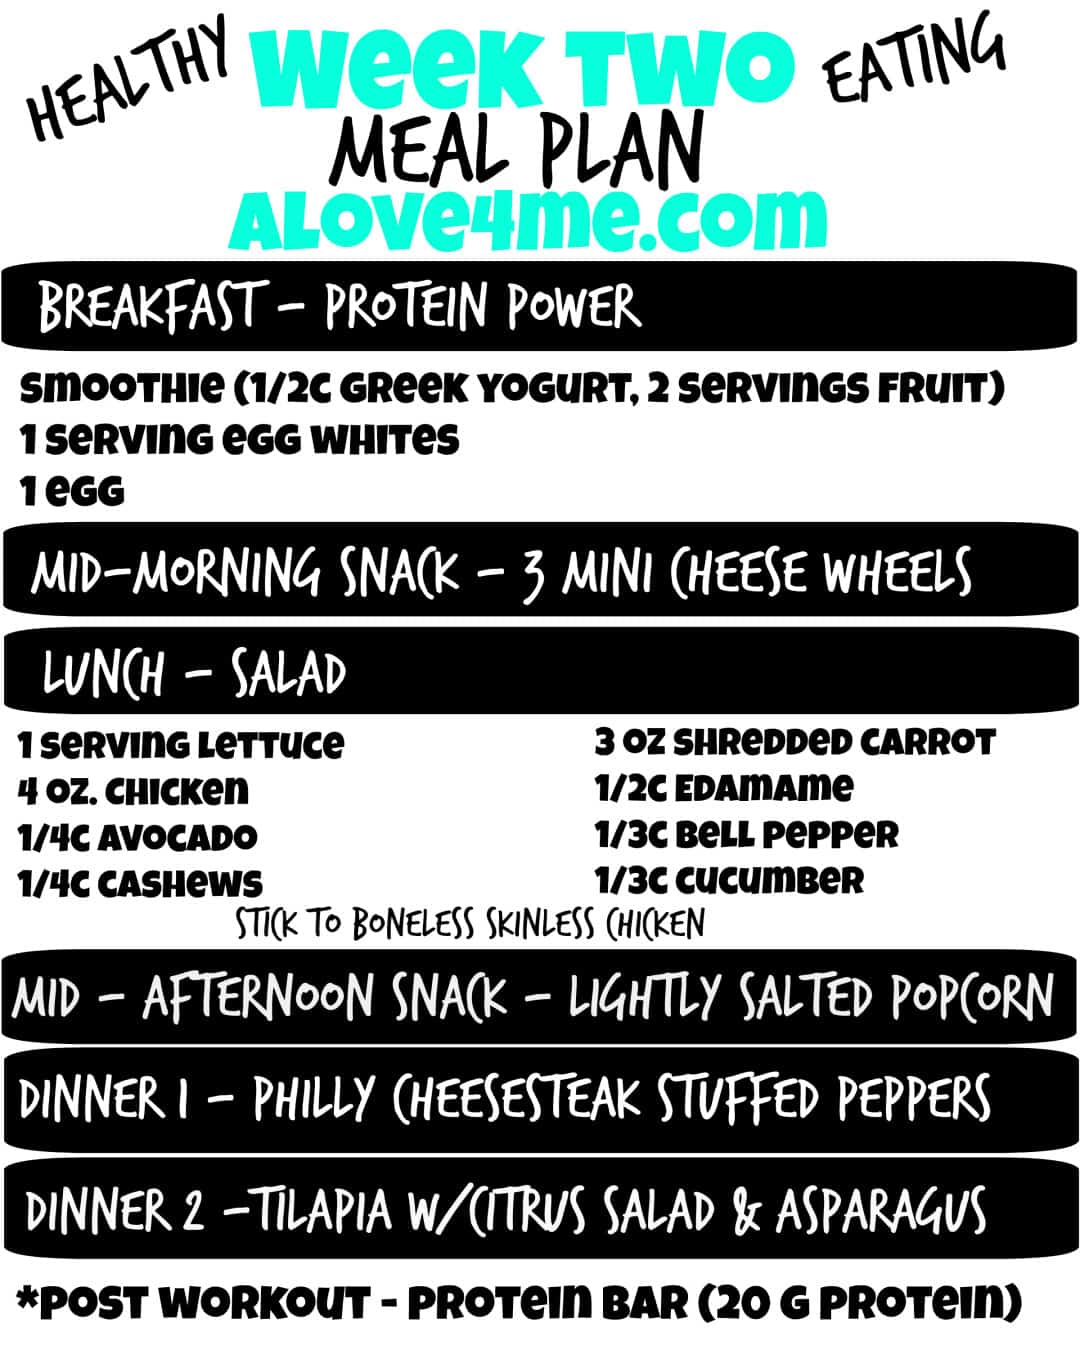 meal plan two healthy eating - ALove4Me